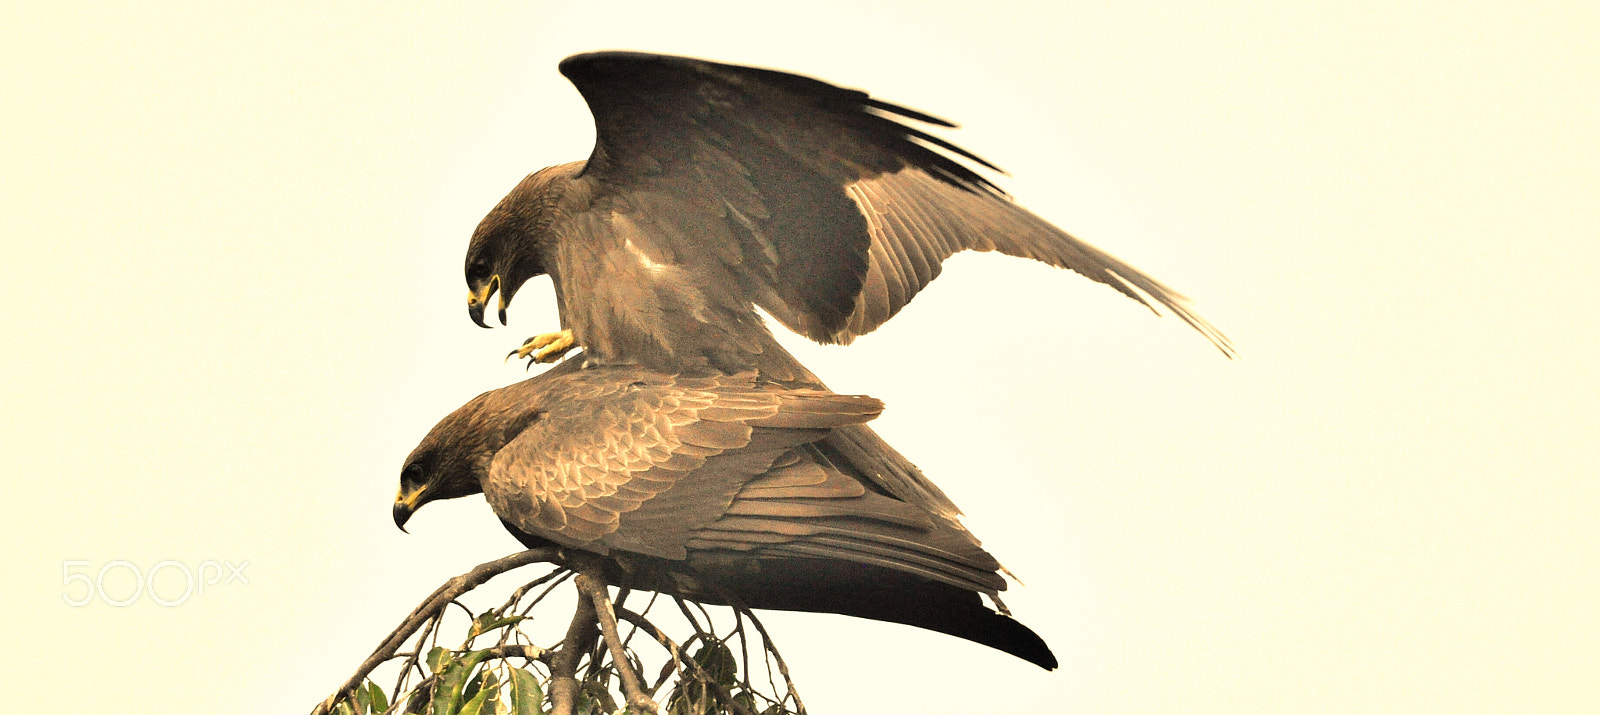 Nikon D90 sample photo. An eagle's eye for another.... photography